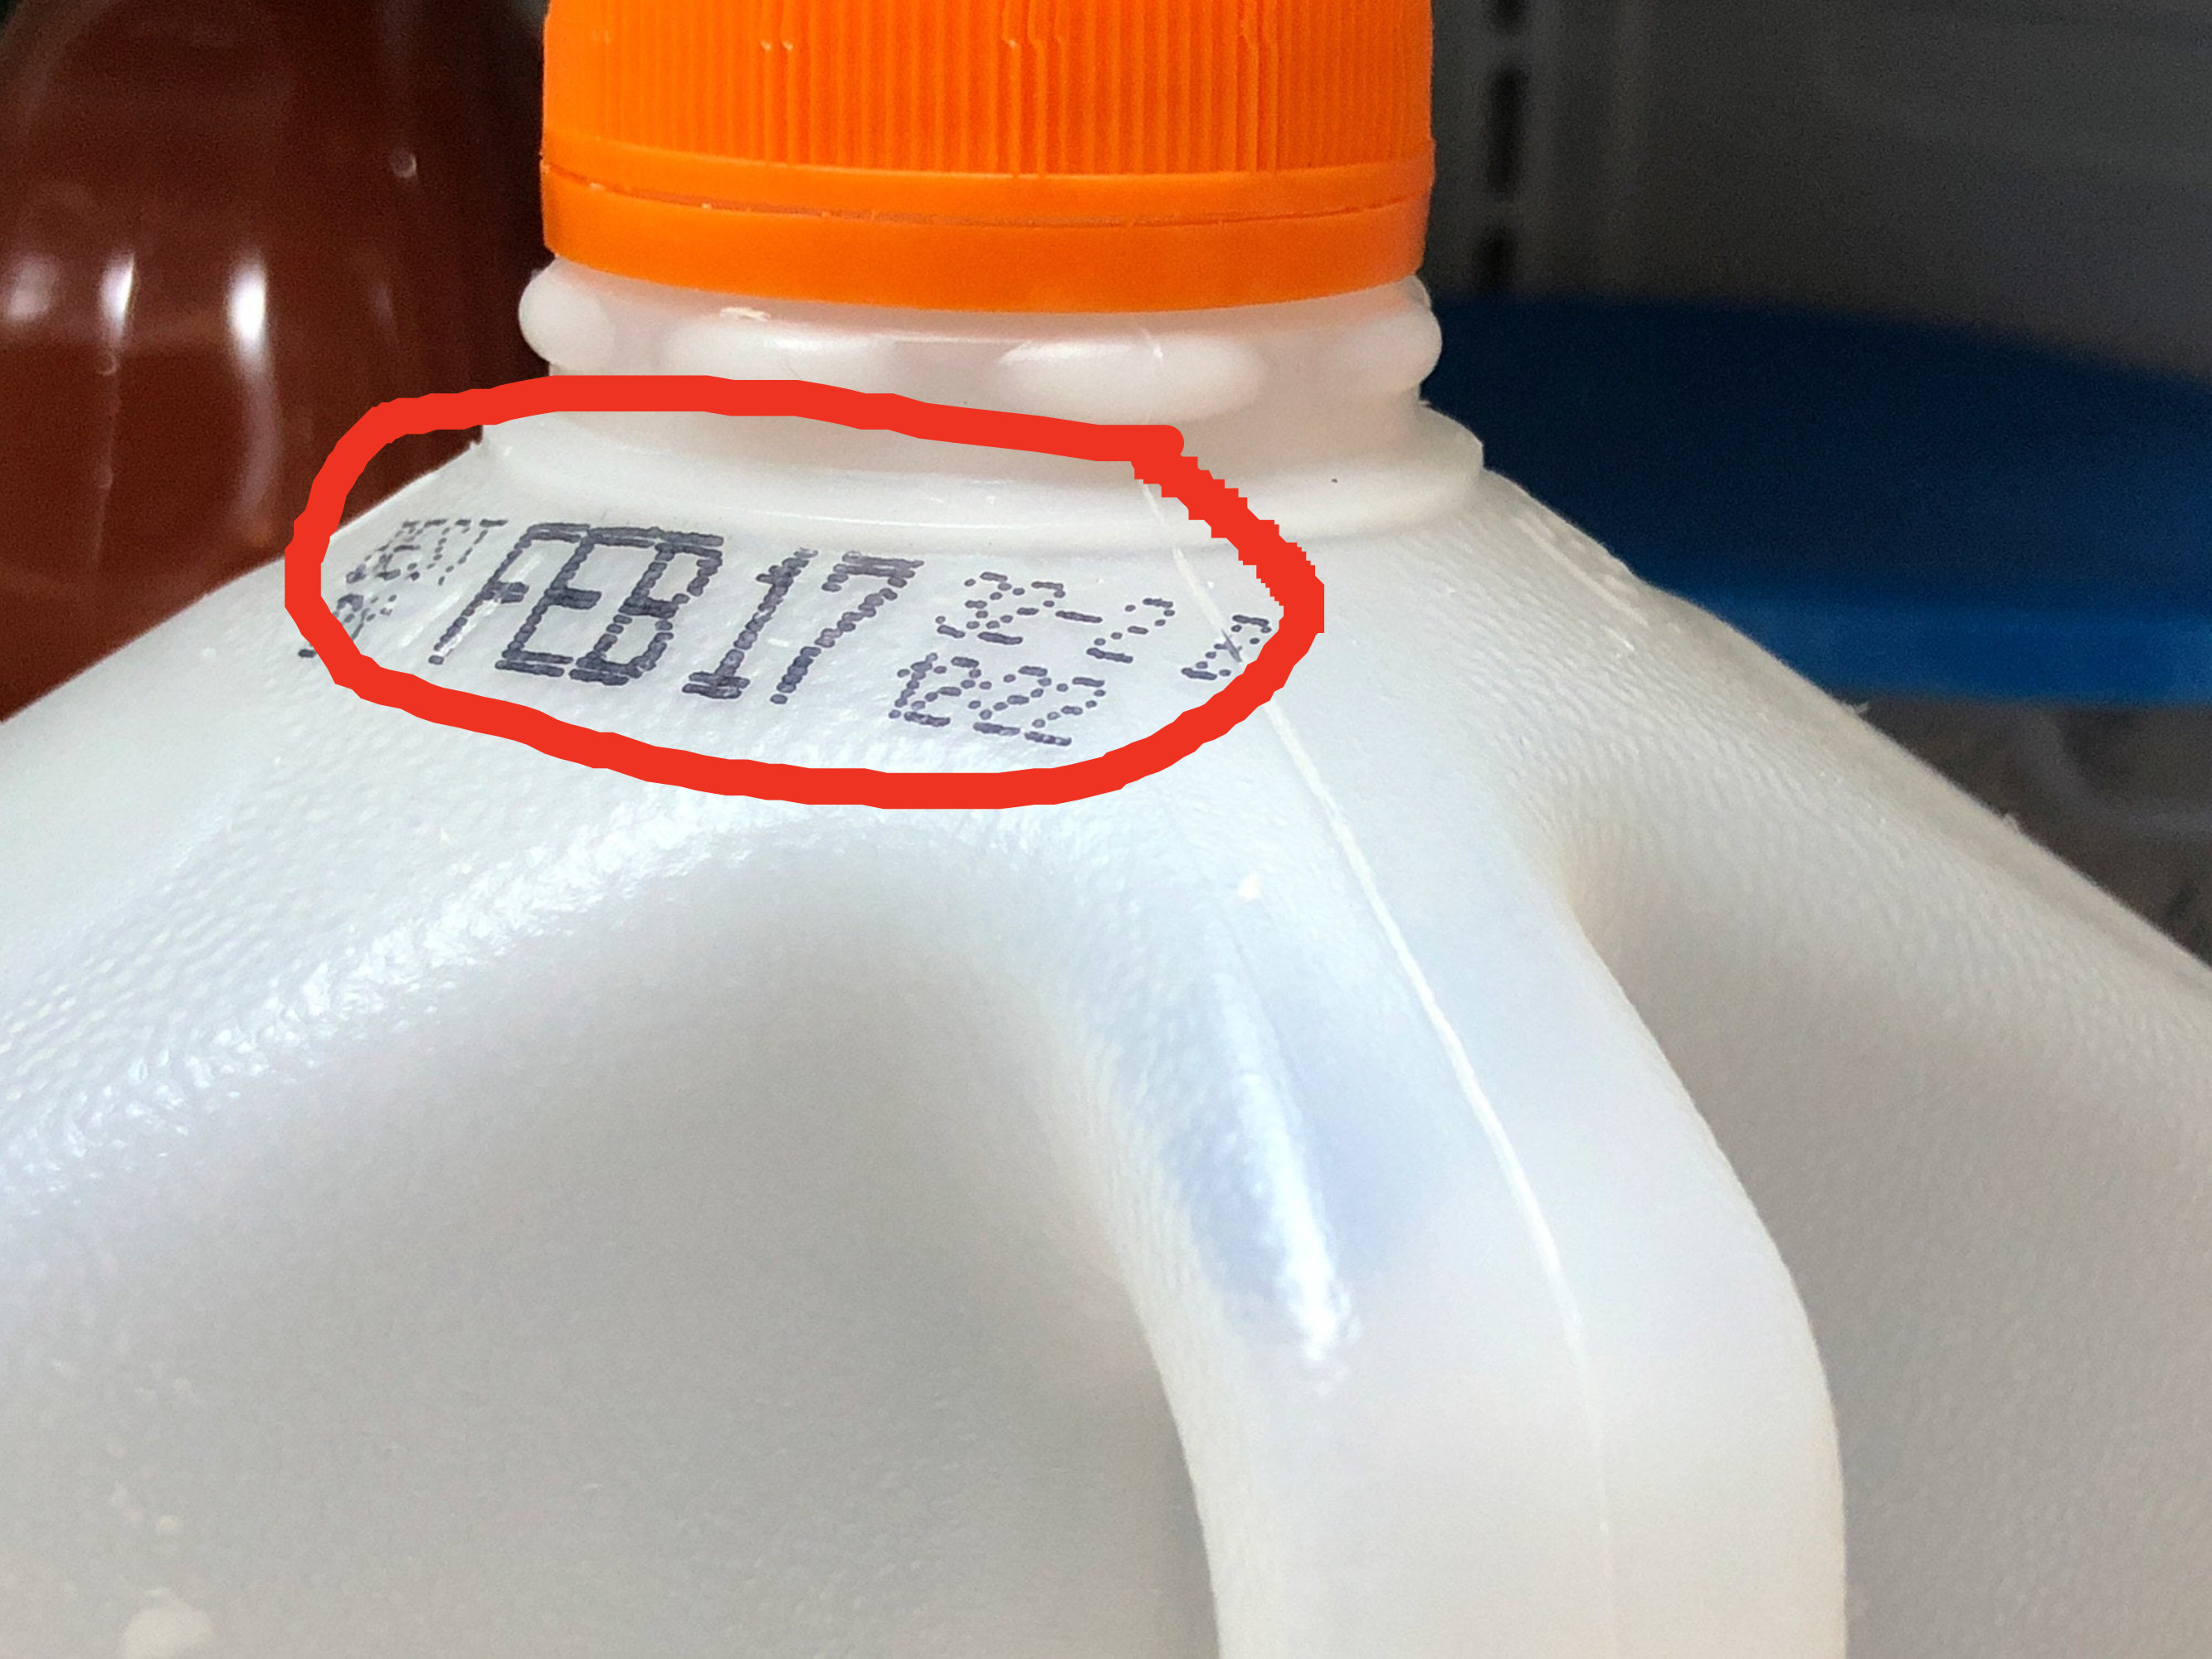 A gallon of milk with an expiration date.